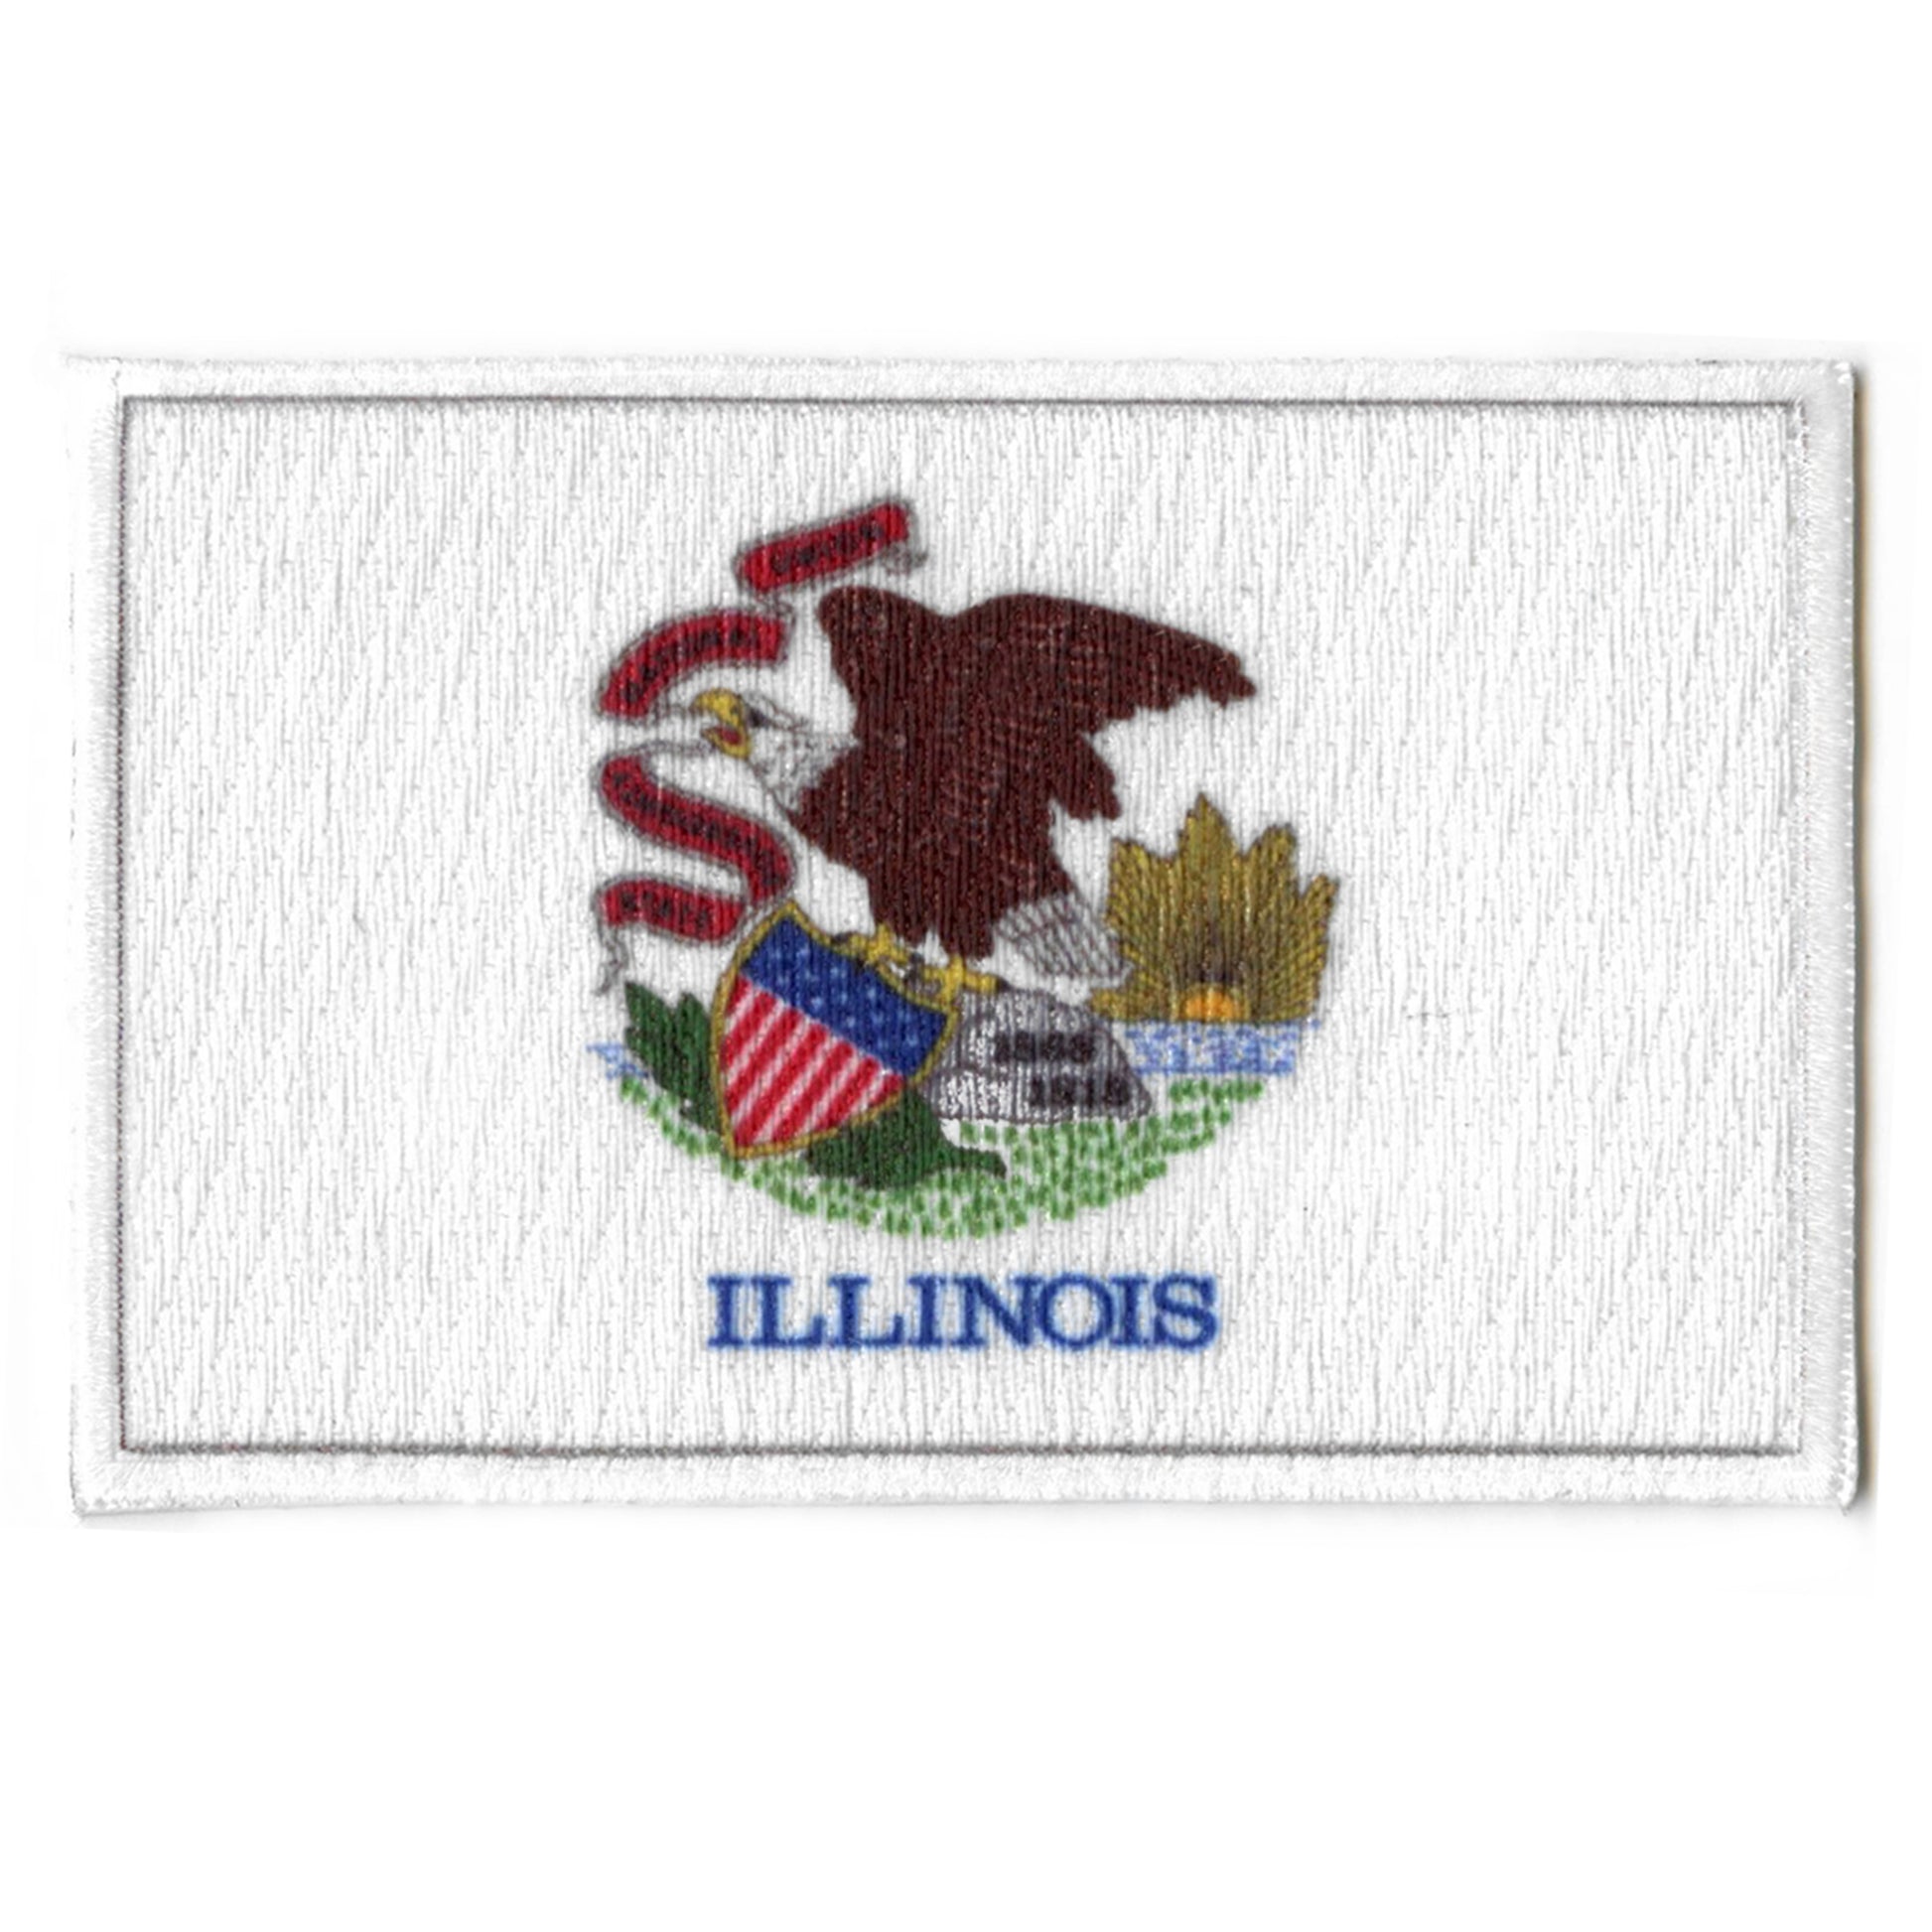 Illinois Patch State Flag Embroidered Iron On 